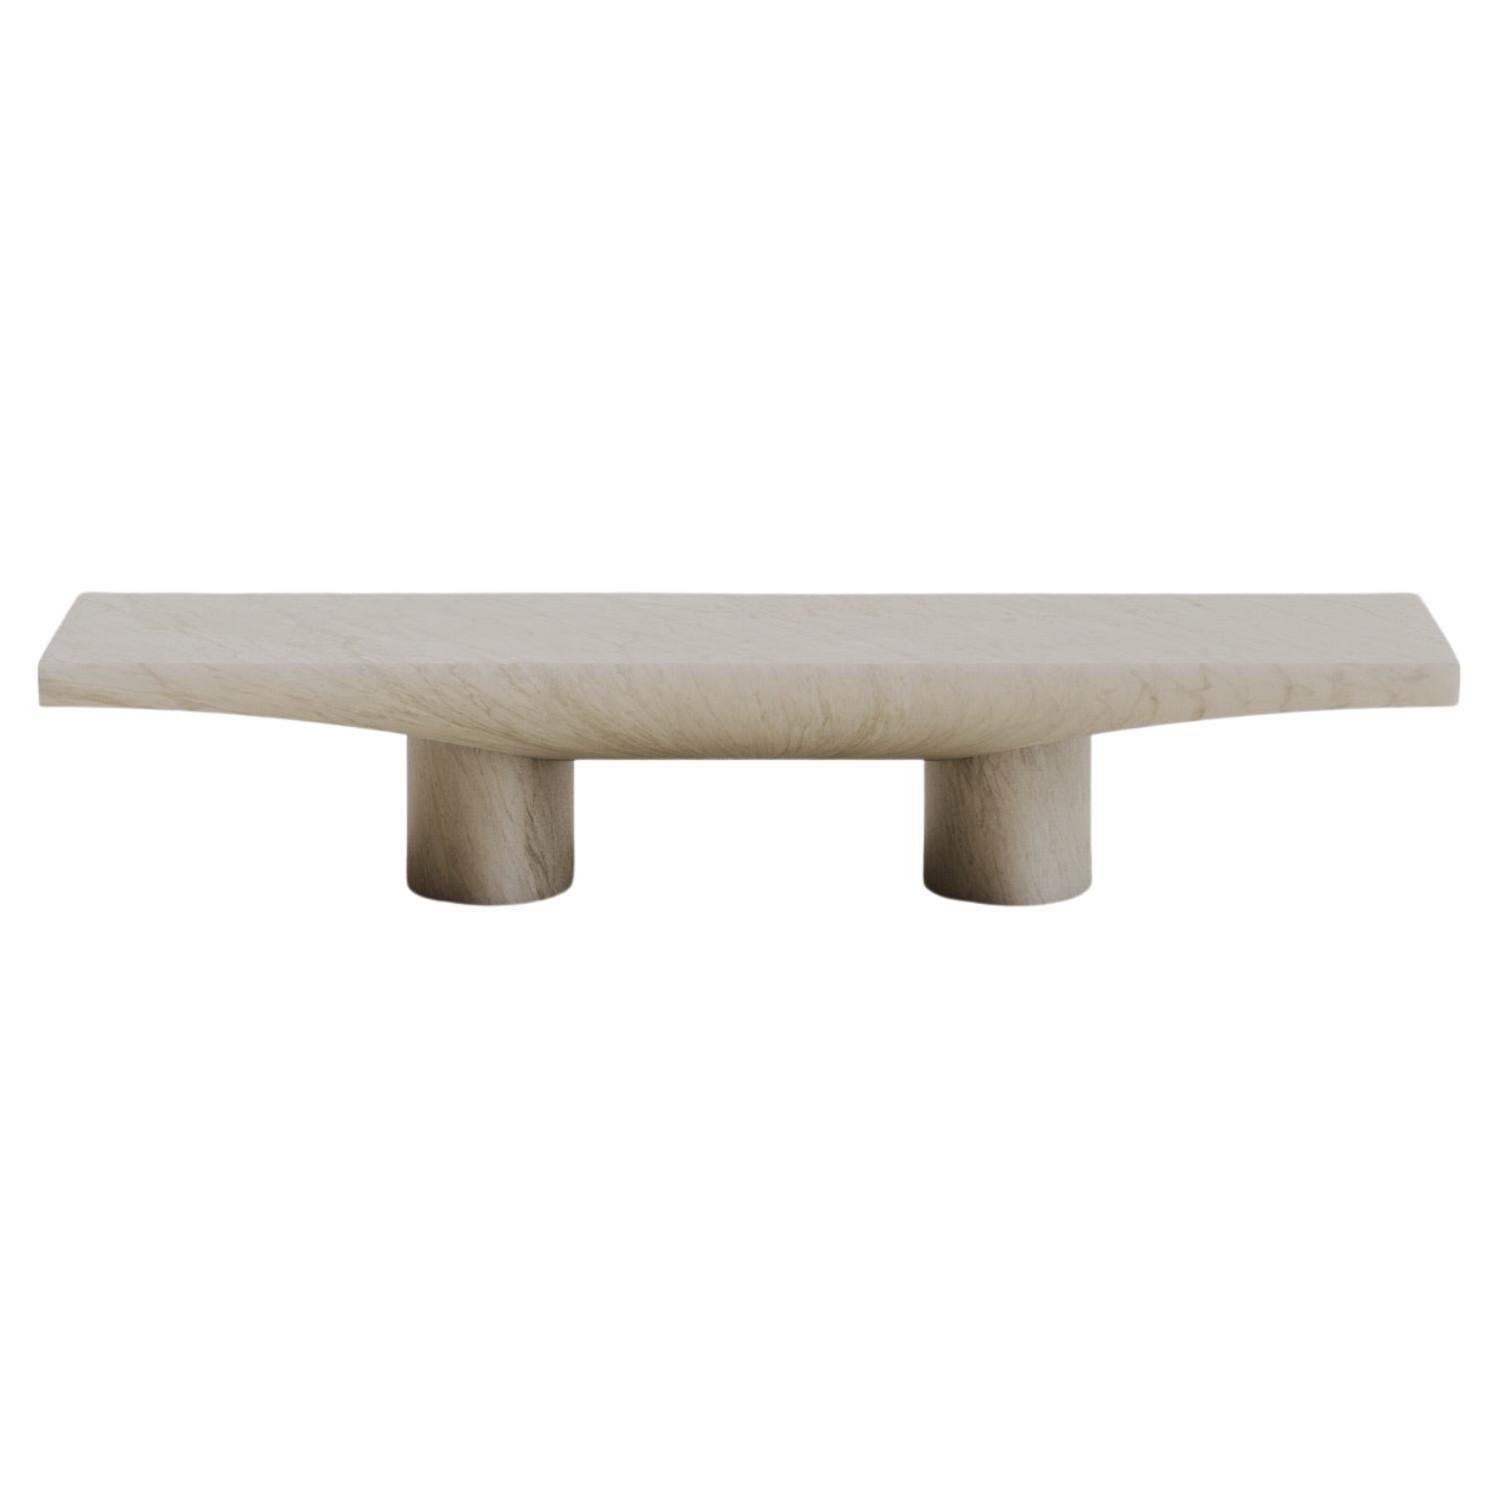 Solid White Marble Abraccio Rectangular Coffee Table 160 by Studio Narra For Sale